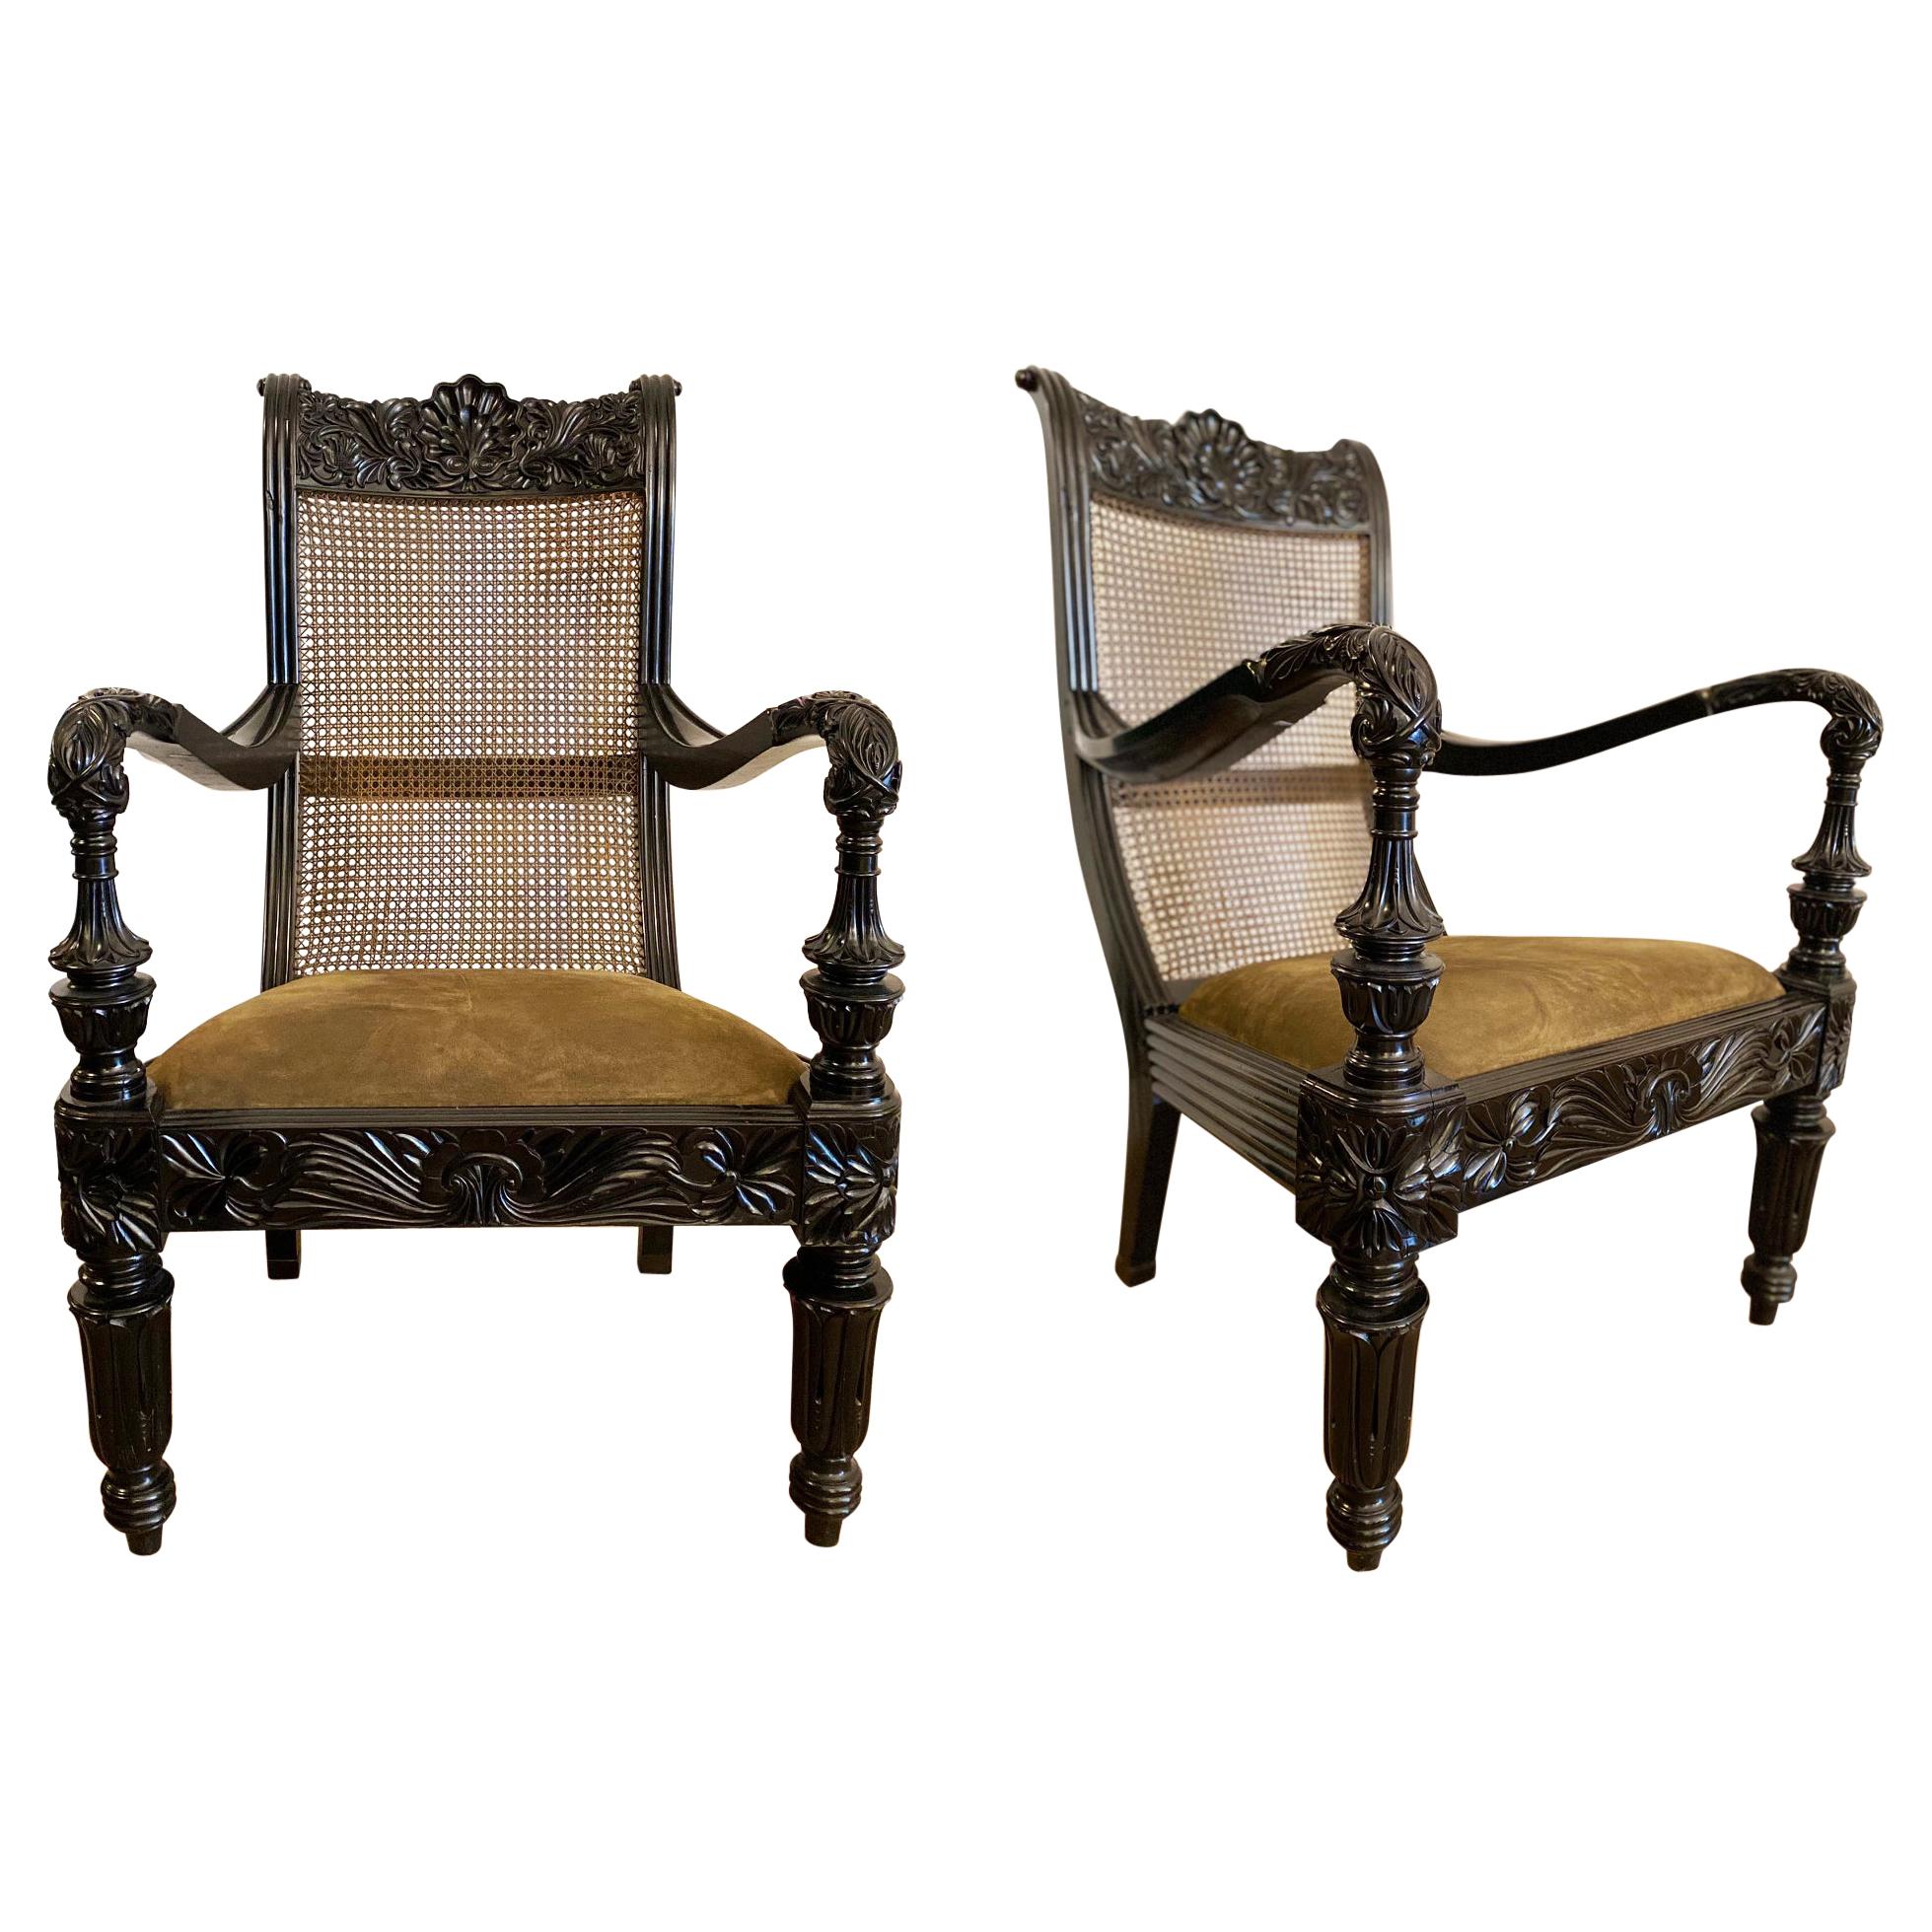 Pair of Anglo-Indian Carved Ebony and Caned Armchairs